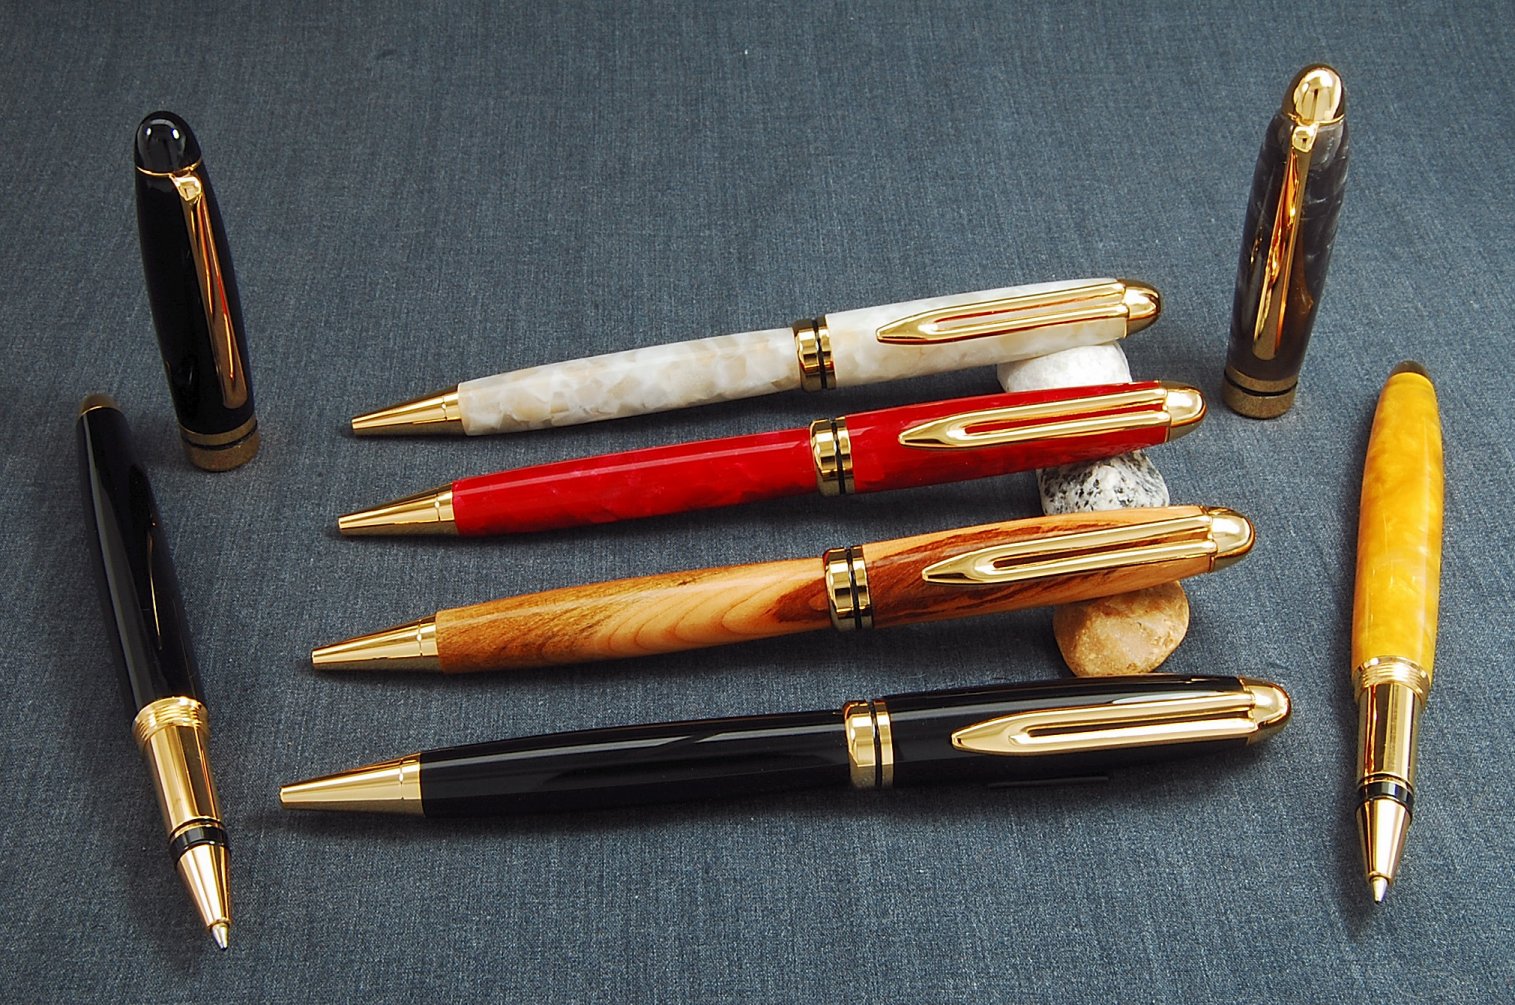 Designer NT rollerball and twist pens